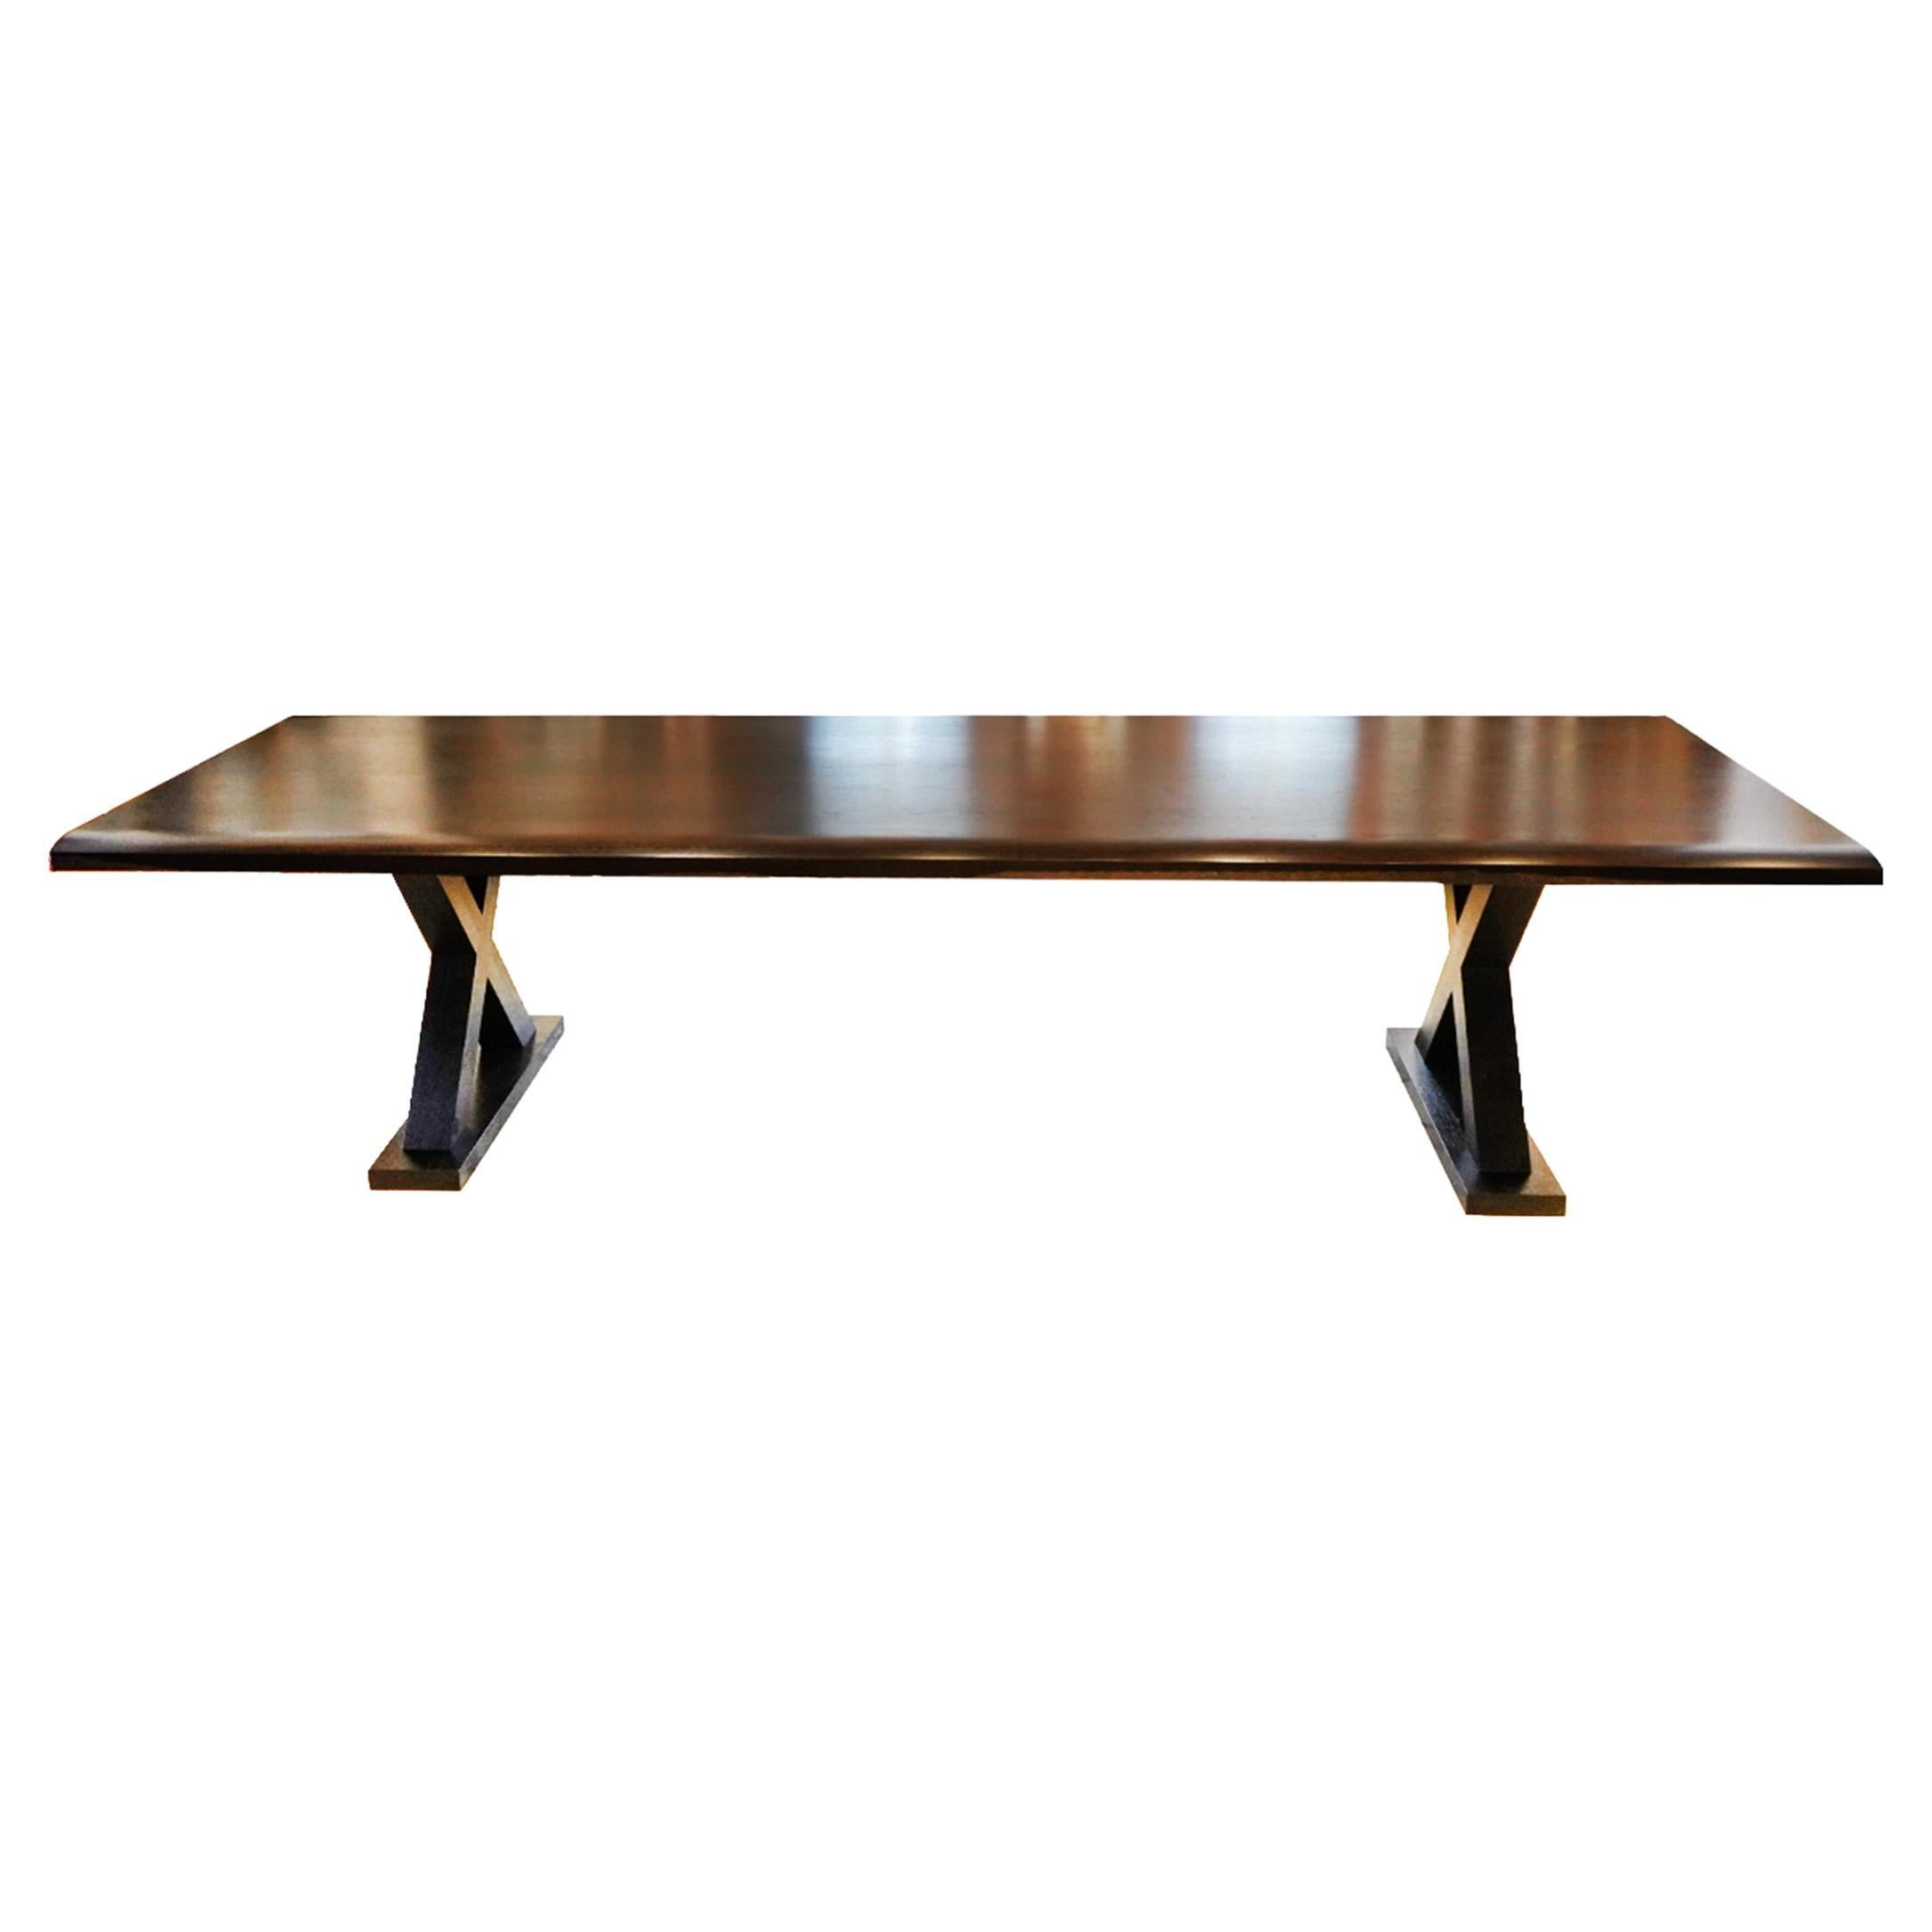 Christian Liaigre for Holly Hunt Courier Dining Table